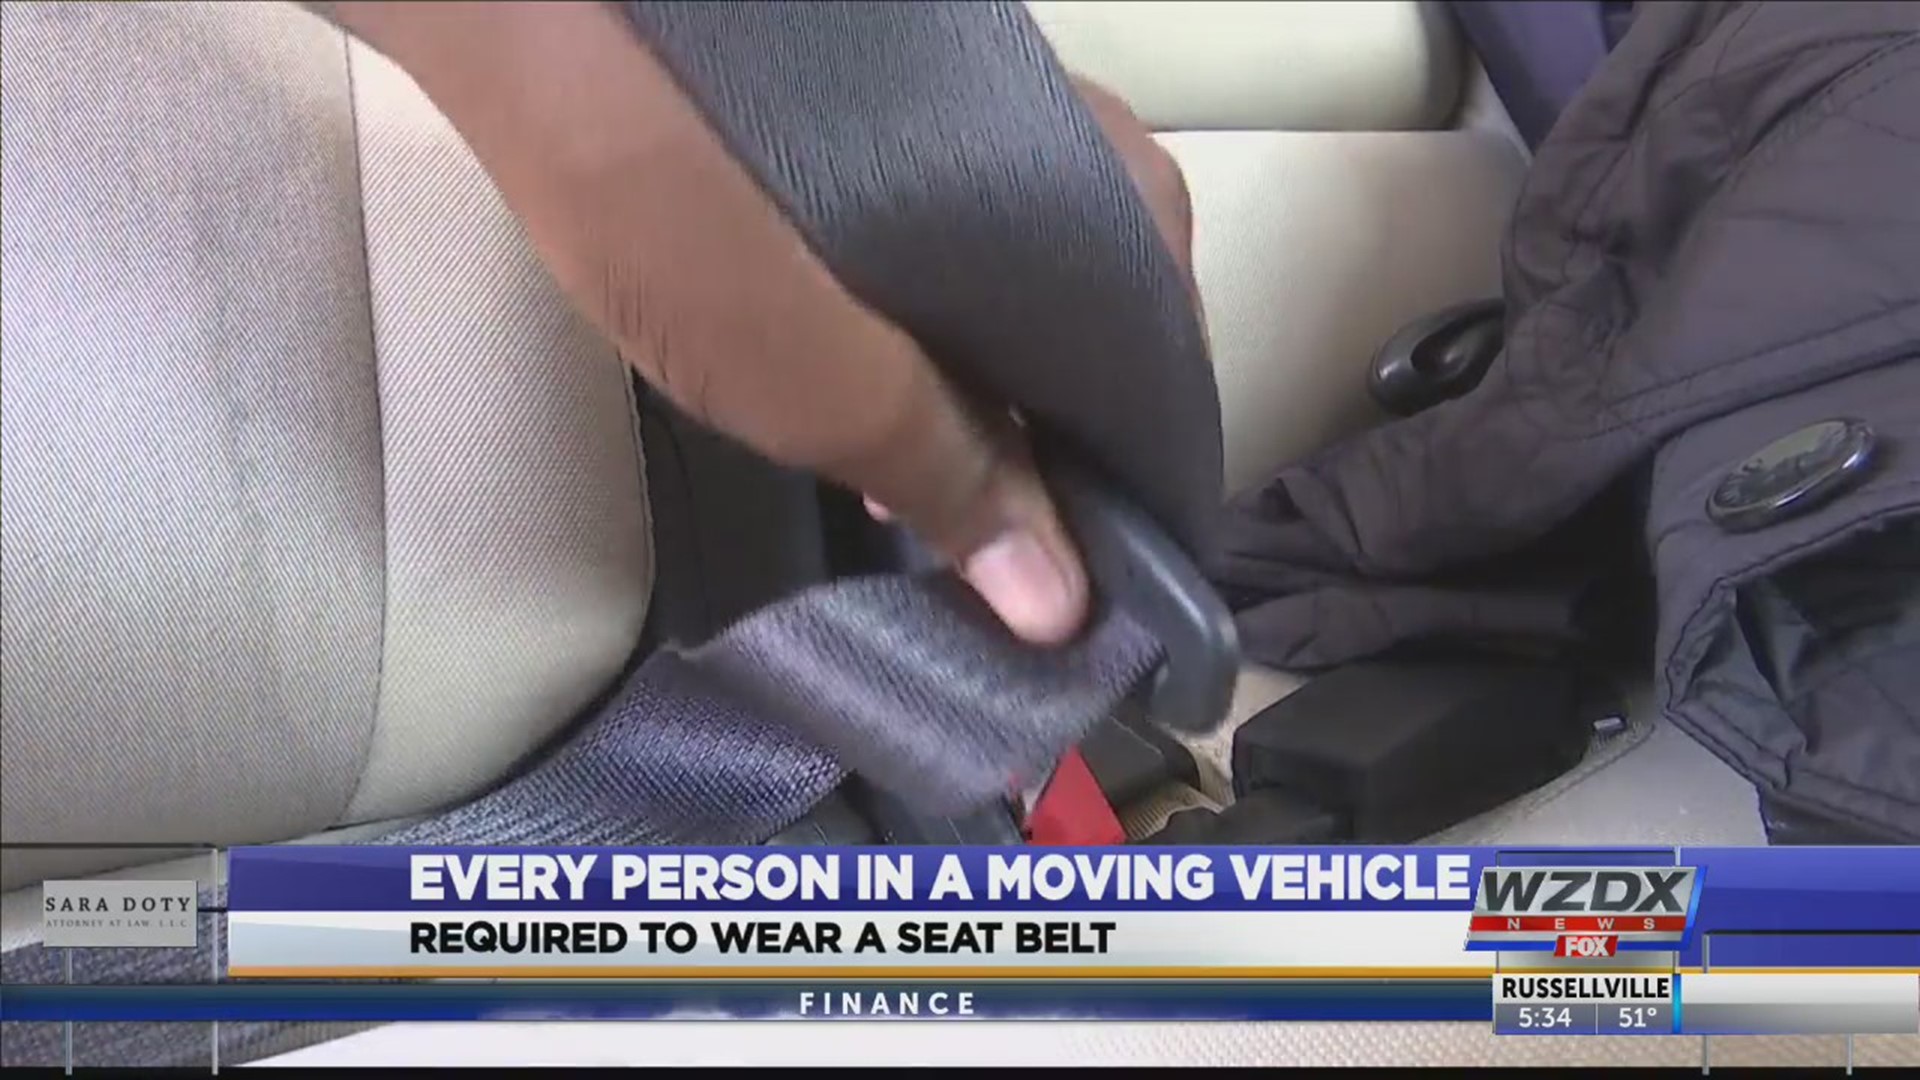 If you're traveling back home after Thanksgiving, make sure to wear your seat belt.